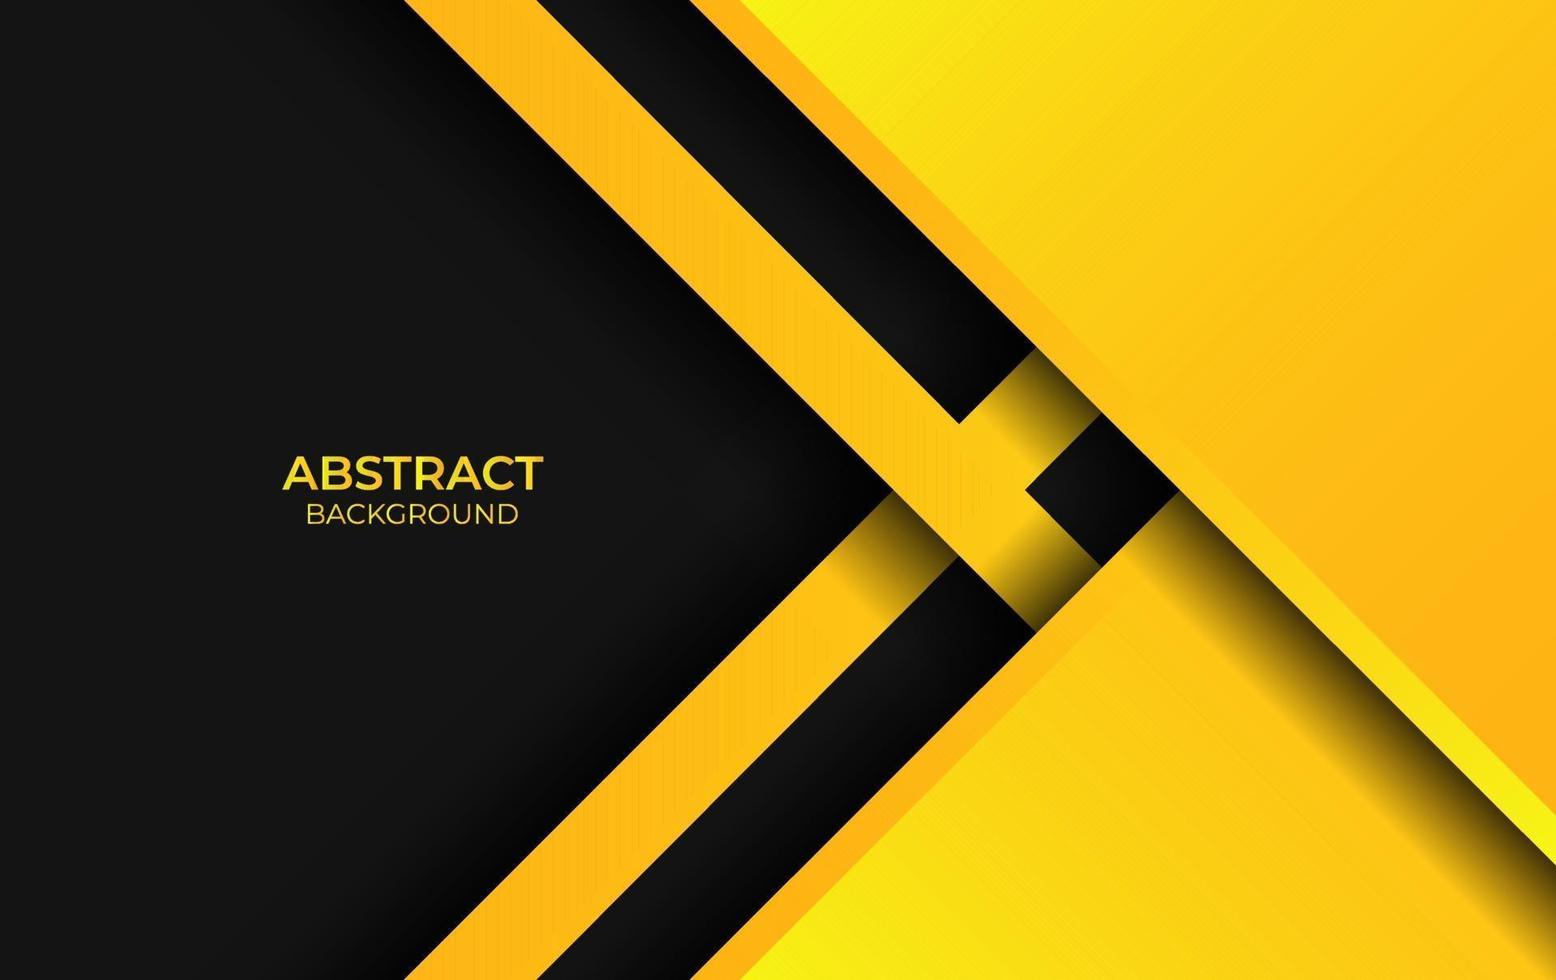 Design Abstract Yellow And Black Style vector